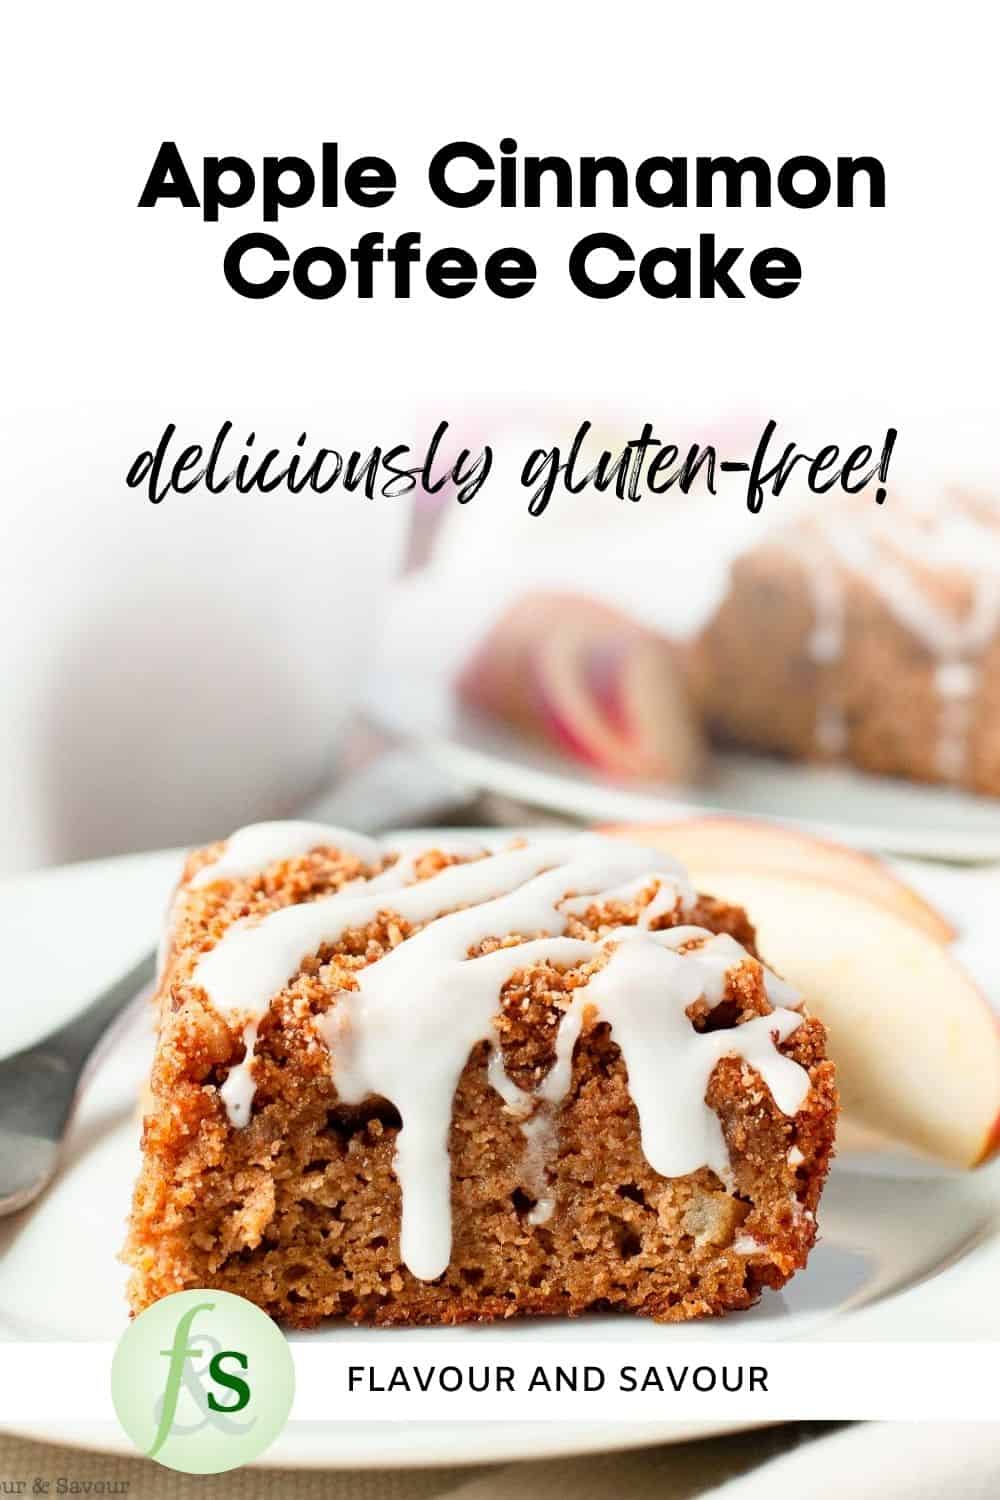 Image with text for gluten-free apple cinnamon coffee cake.